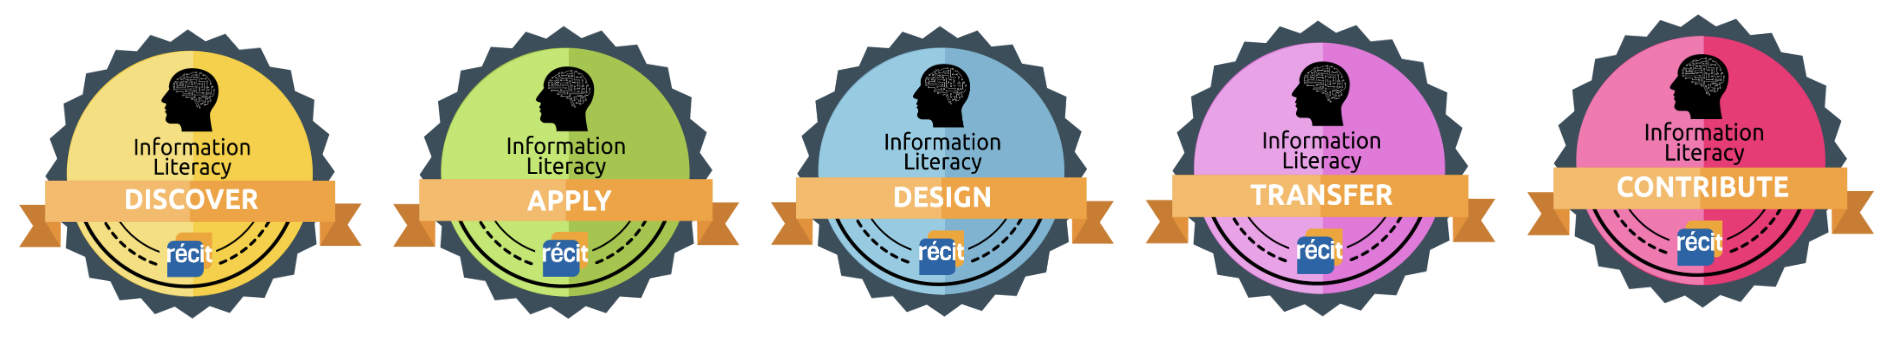 Five Badges Information Literacy